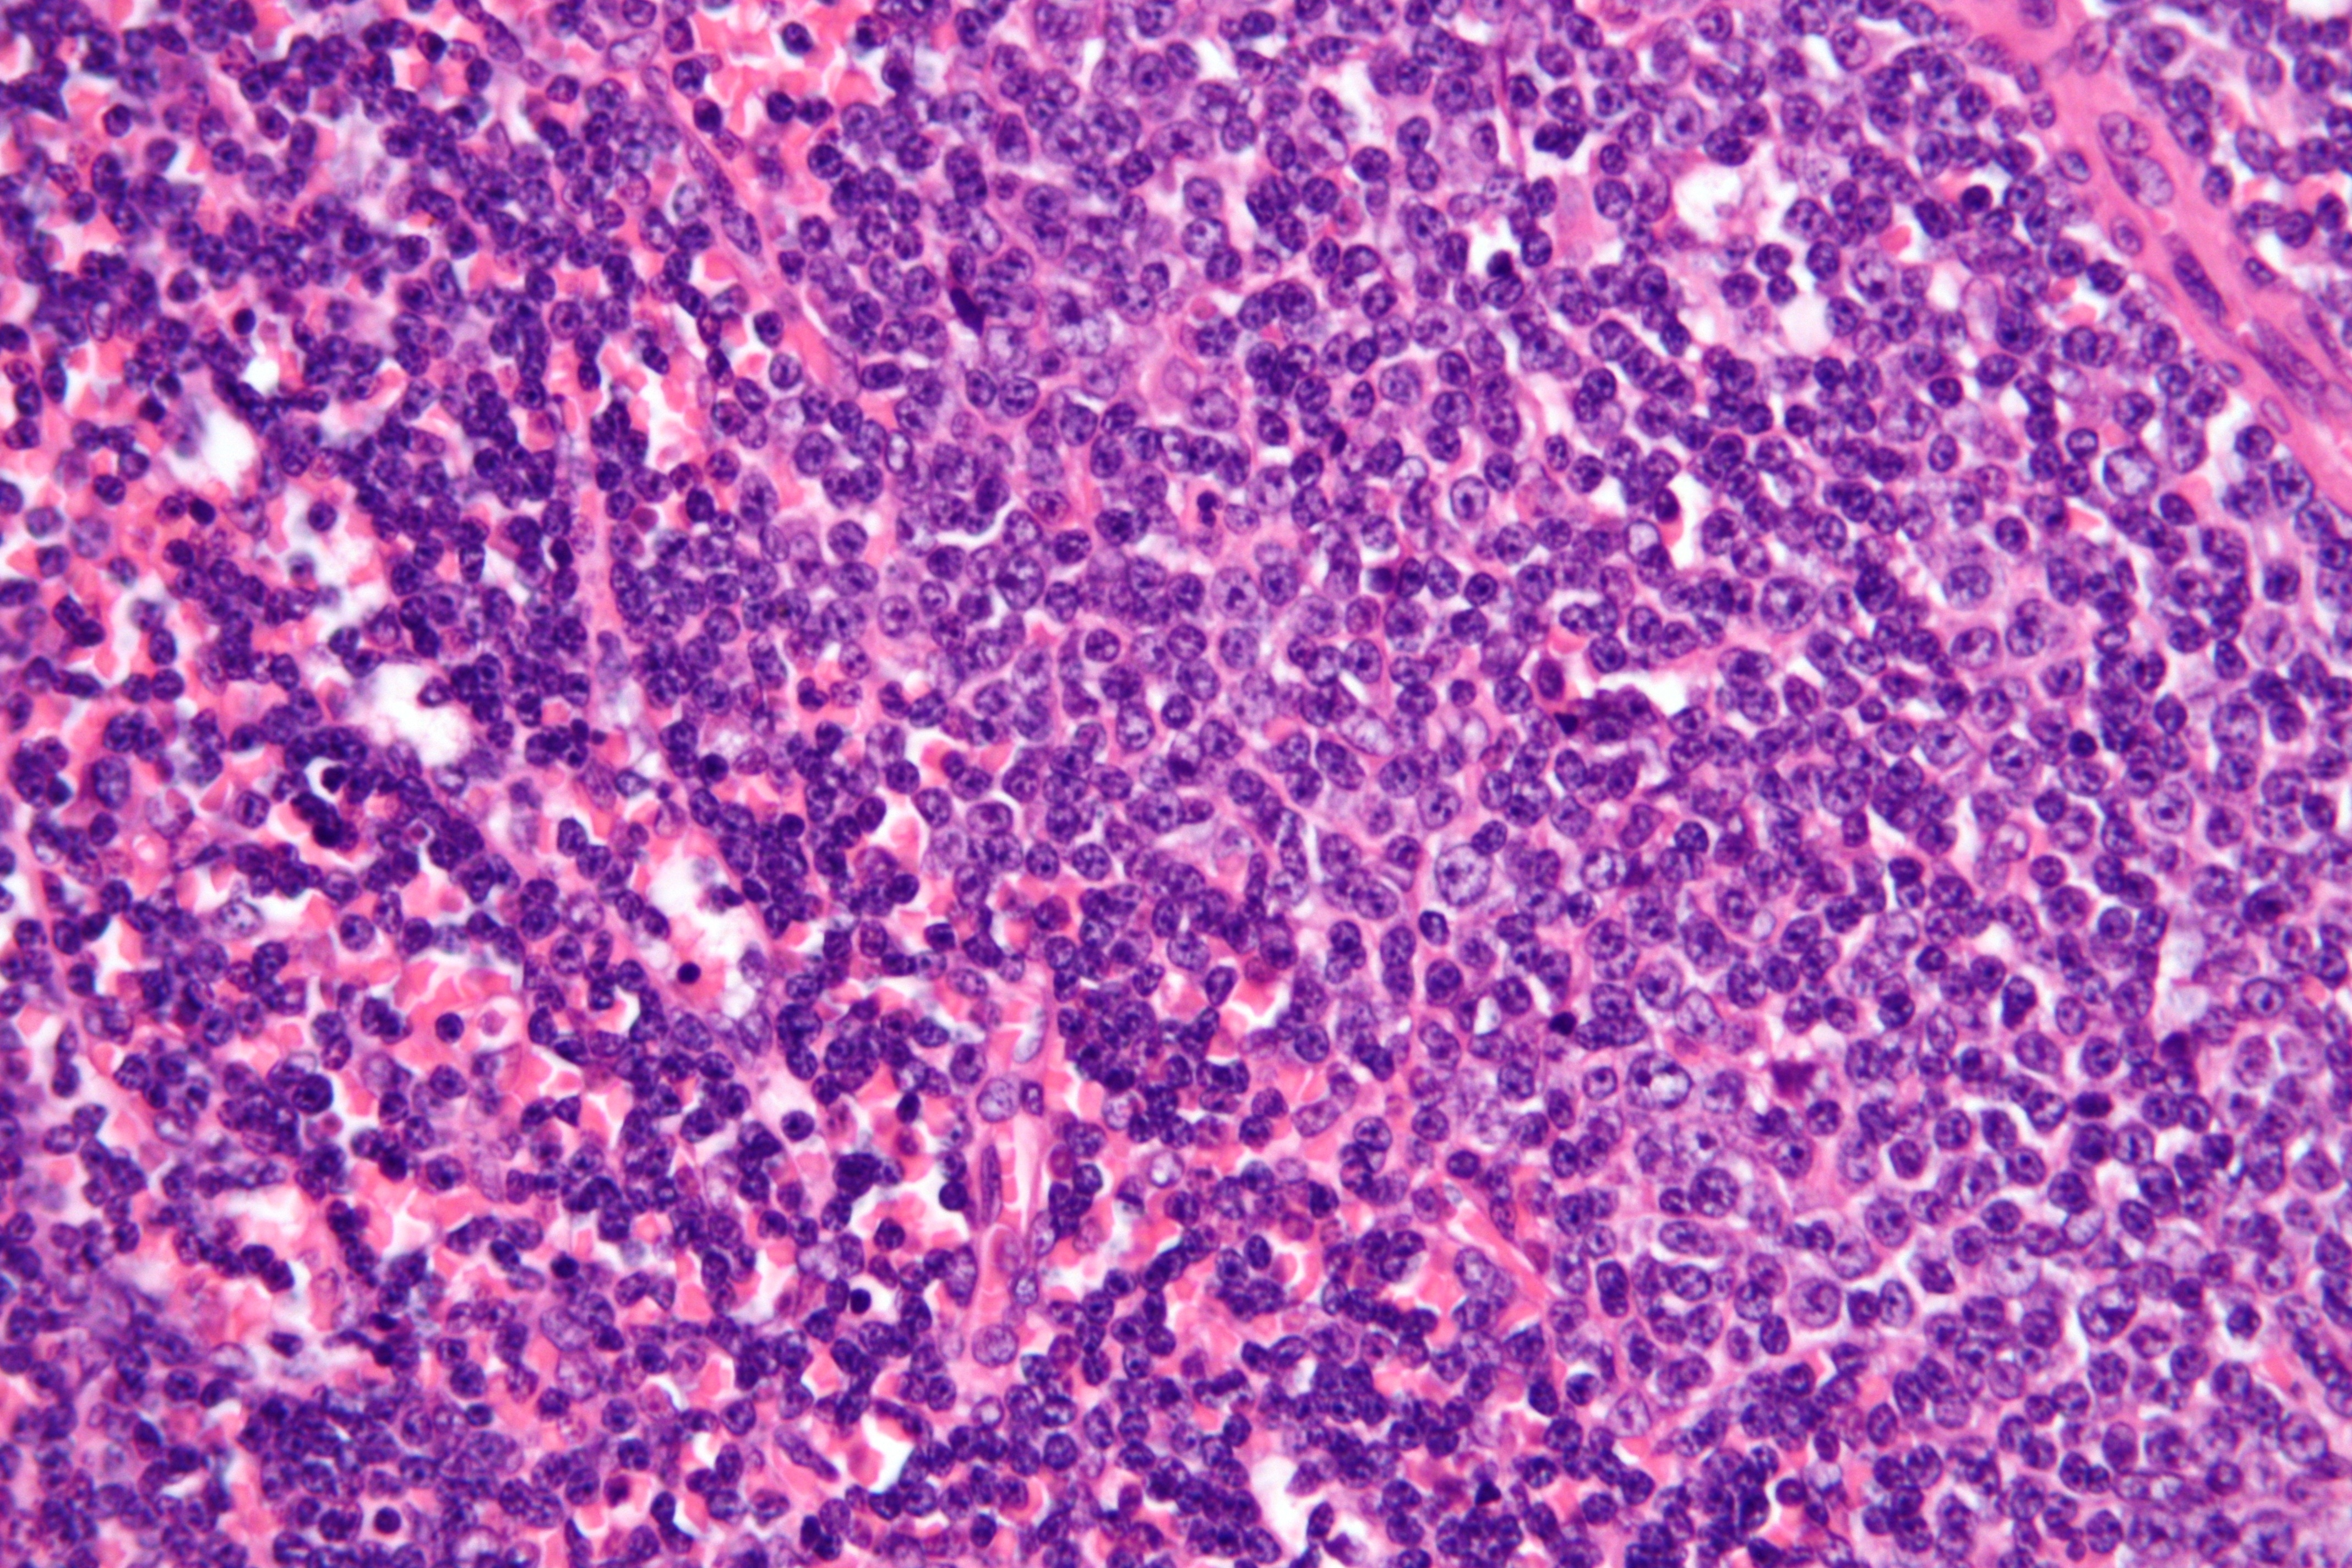 Very high magnification micrograph of B-cell chronic lymphocytic leukemia/small cell lymphoma. (Nephron/Wikimedia Commons)